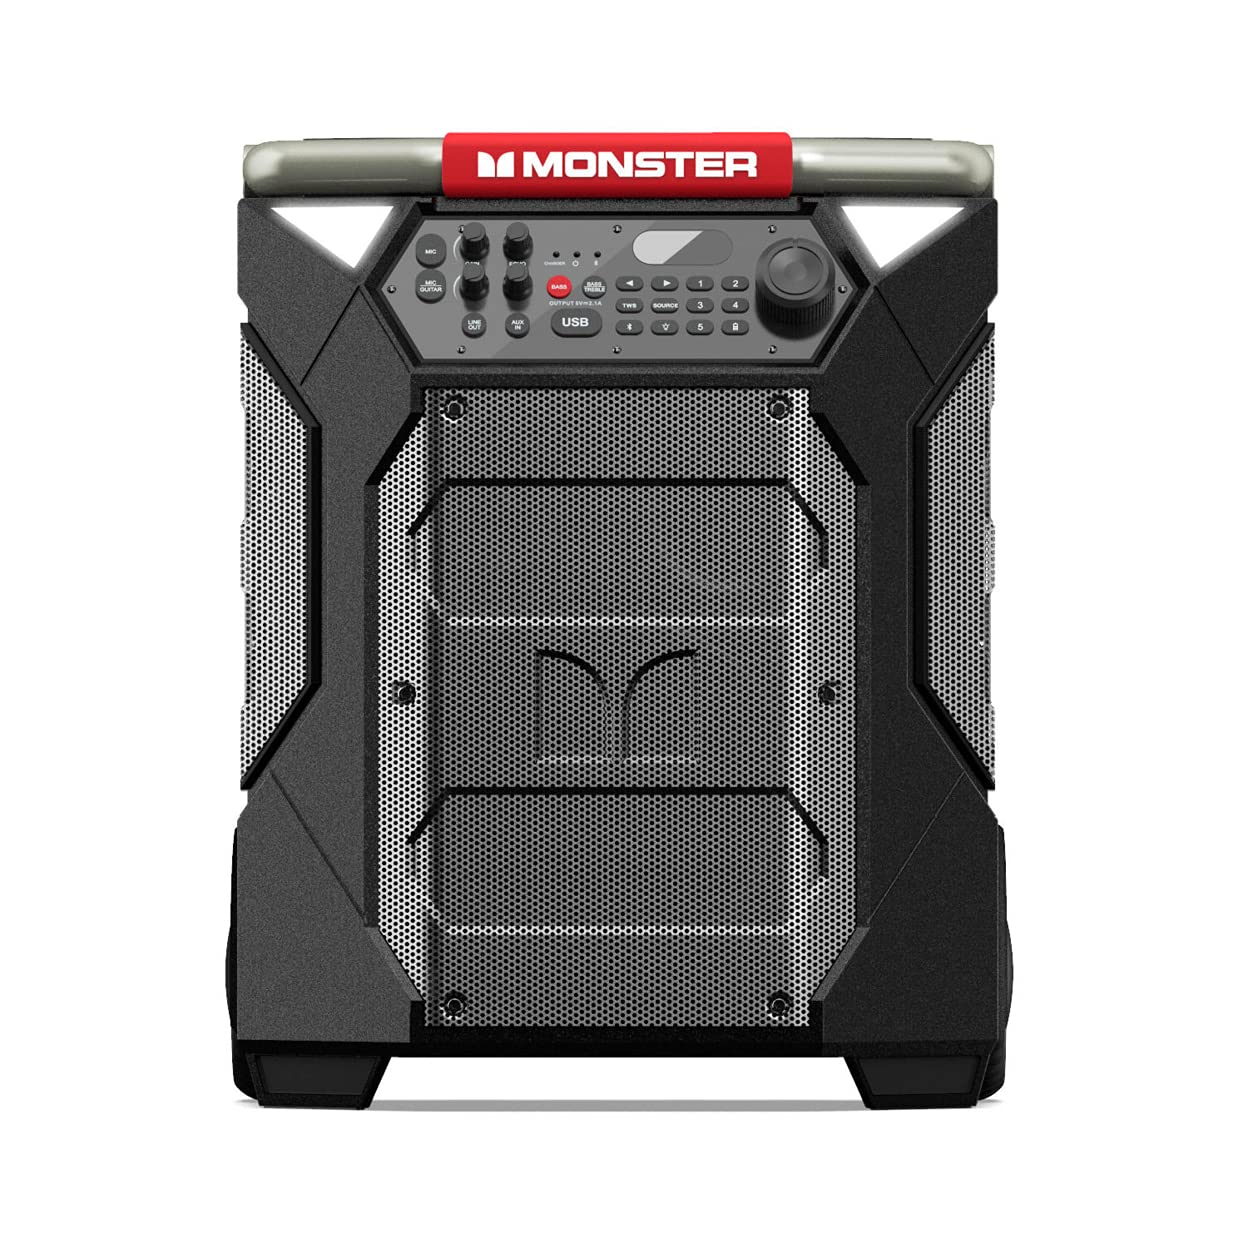 MONSTER Rockin' Roller 270 Portable Indoor/Outdoor Wireless Speaker, 200 Watts, Up to 100 Hours Playtime, IPX4 Water Resistant, Qi Charger, Connect to Another TWS Speaker